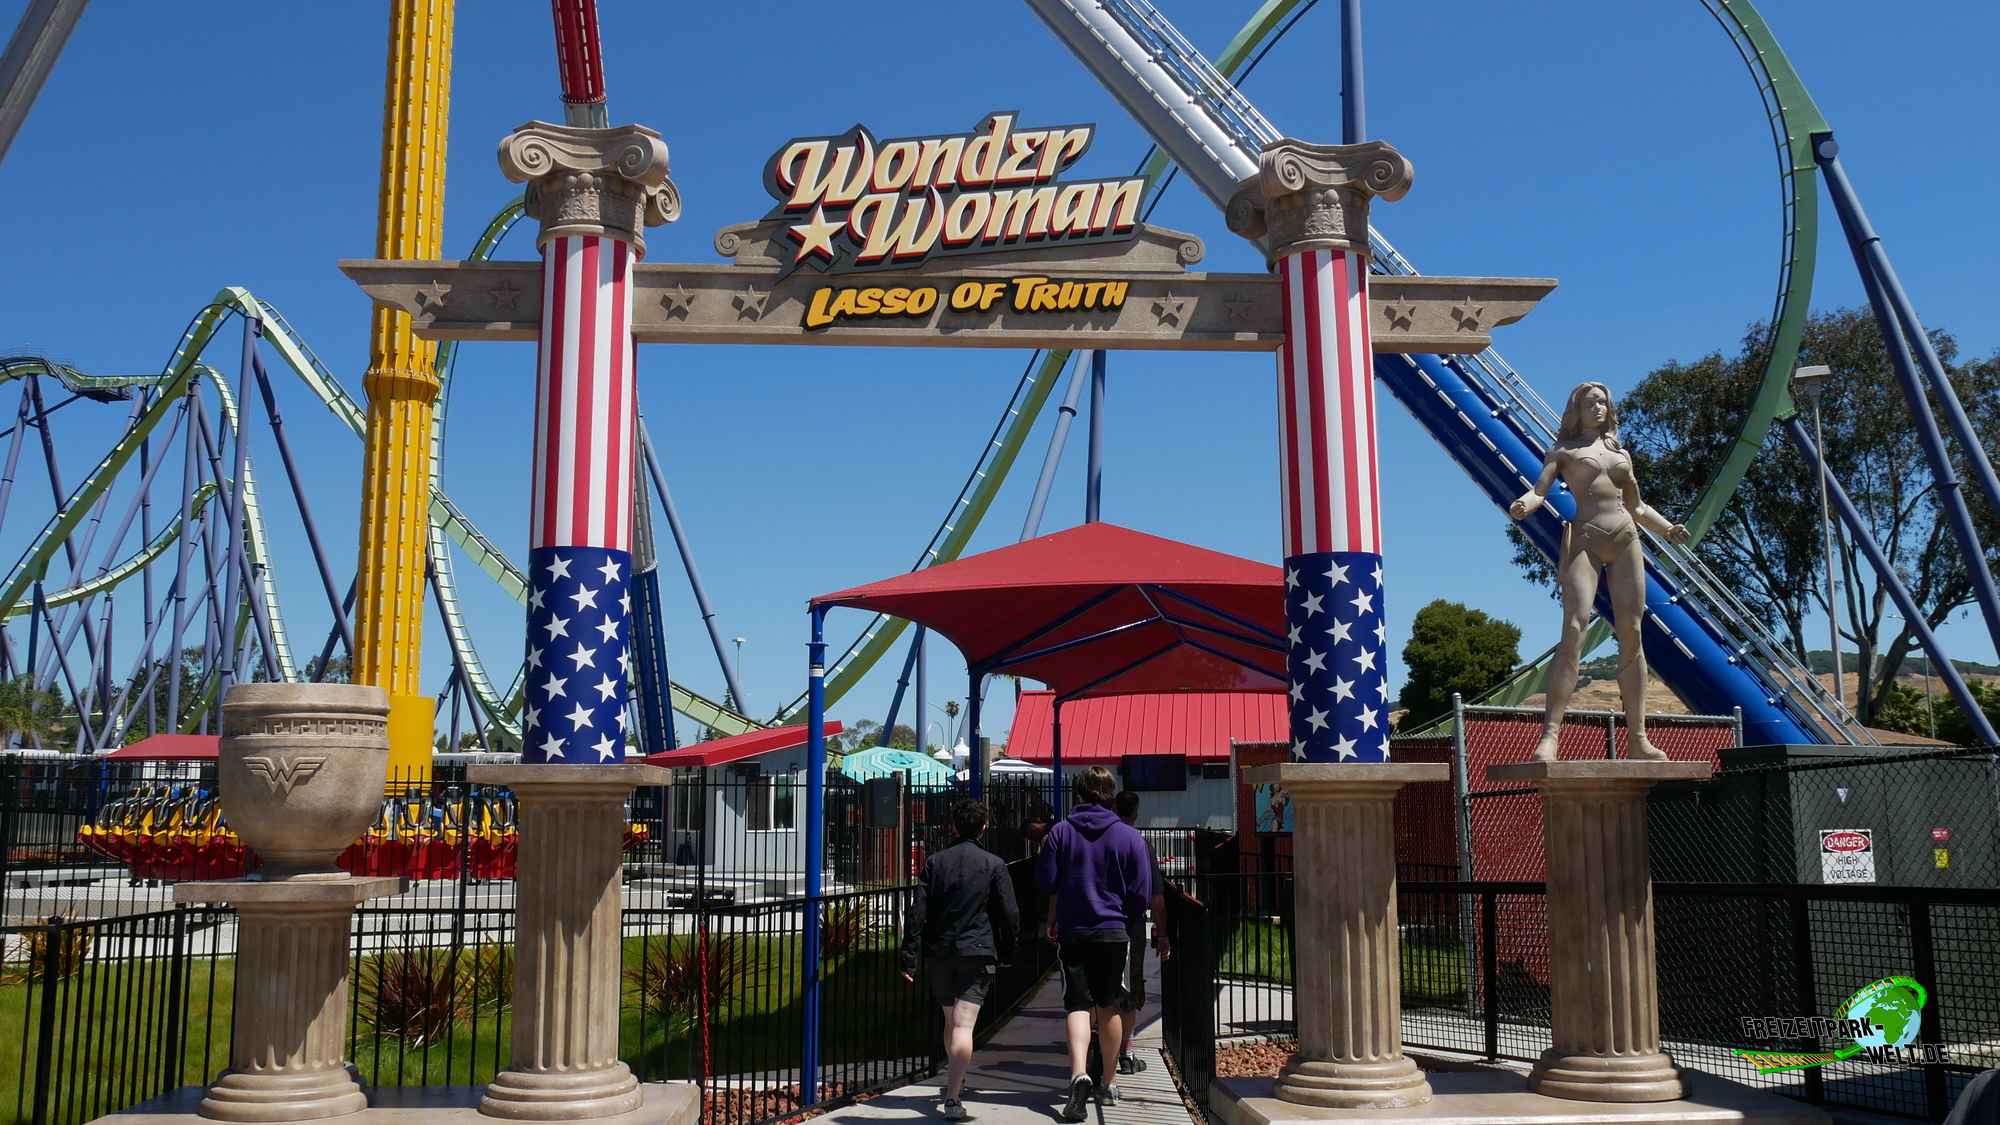 wonder woman lasso of truth six flags discovery kingdom